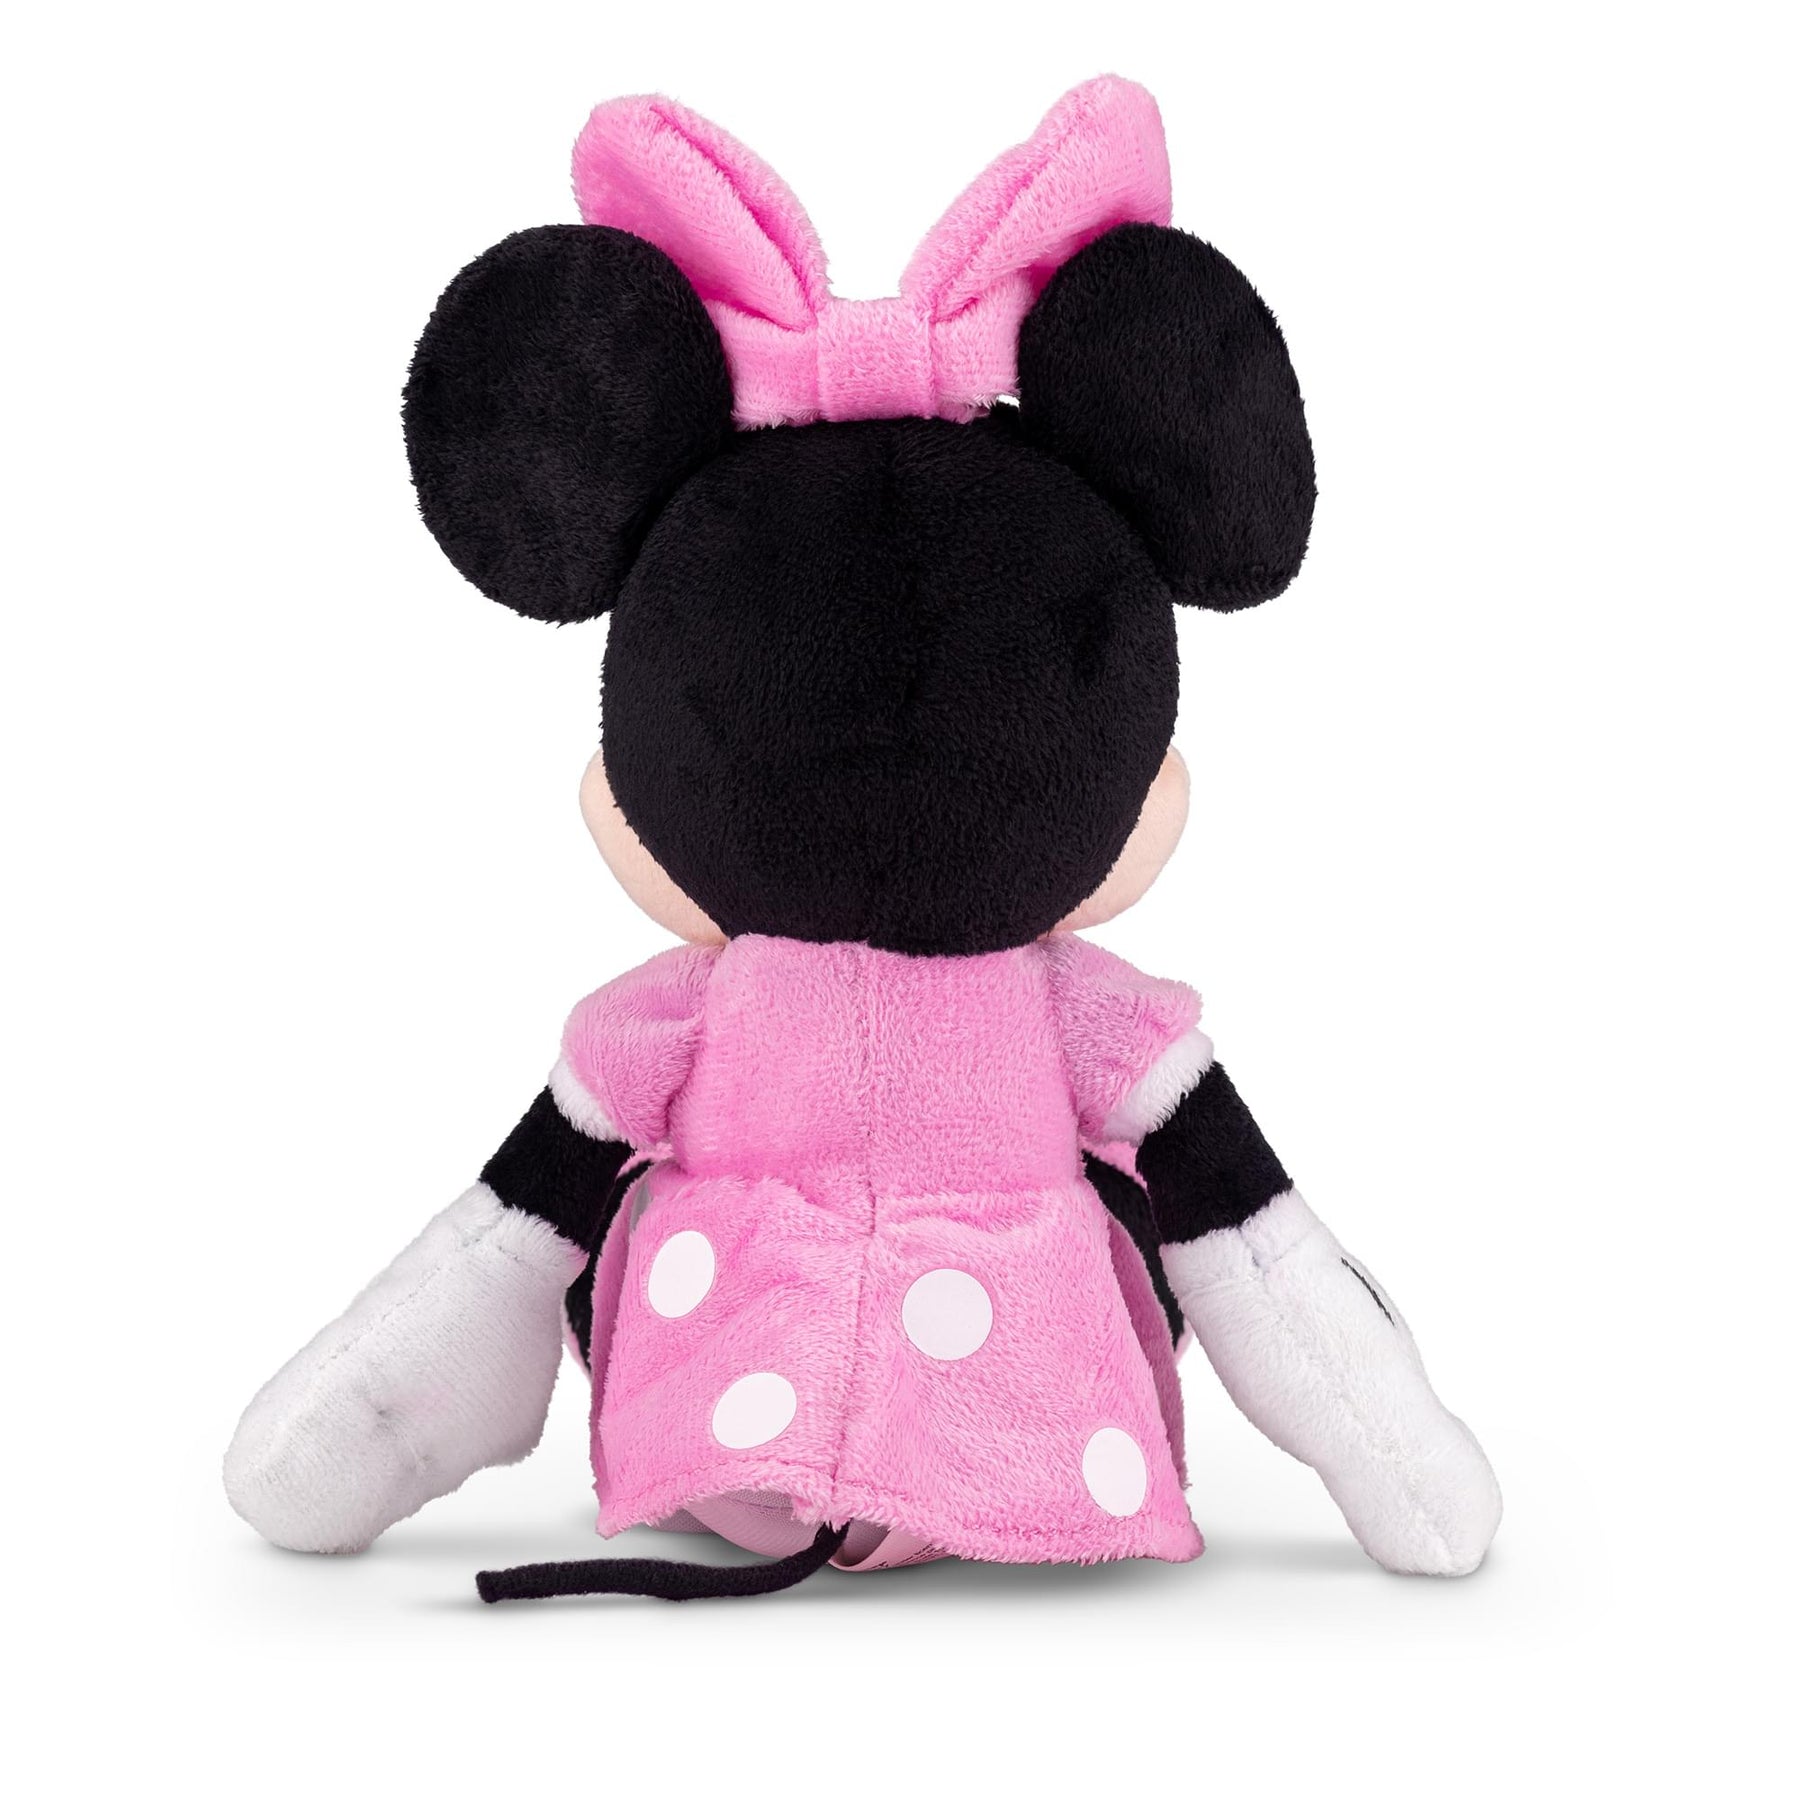 Disney Minnie Mouse 11 inch Child Plush Toy Stuffed Character Doll in Pink Dress